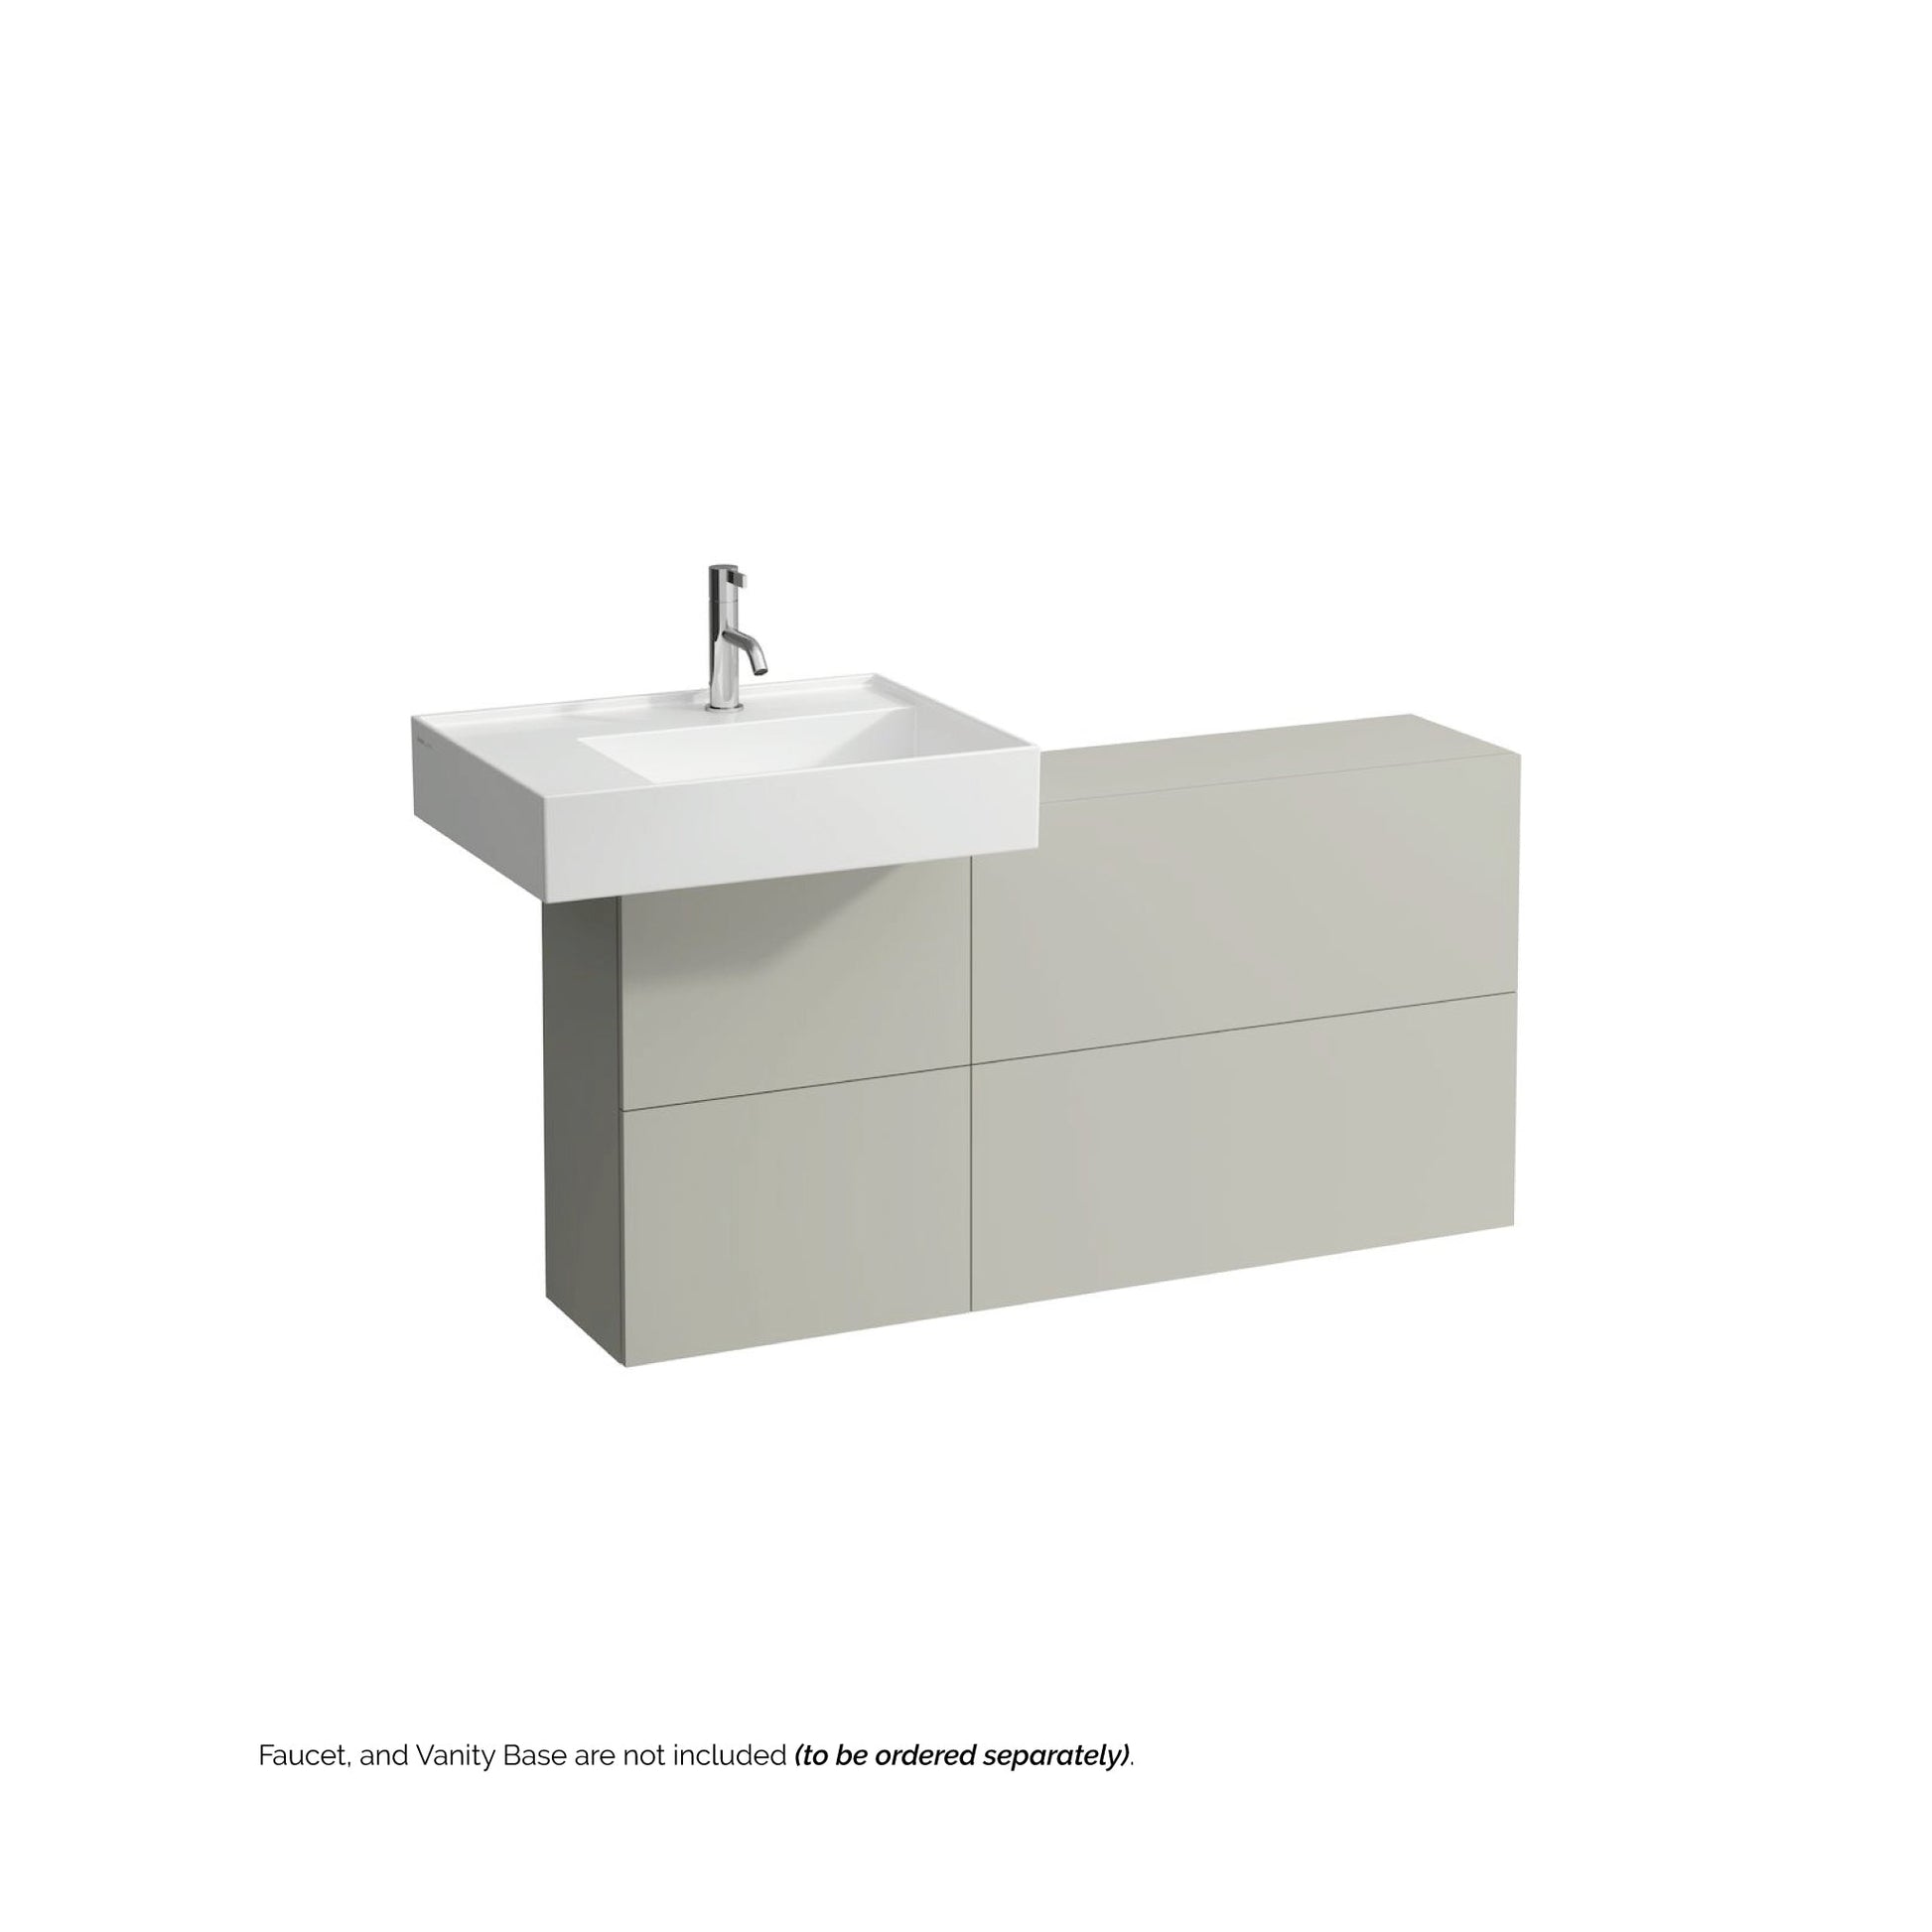 Laufen Kartell 24" x 18" White Wall-Mounted Shelf-Left Bathroom Sink With Faucet Hole